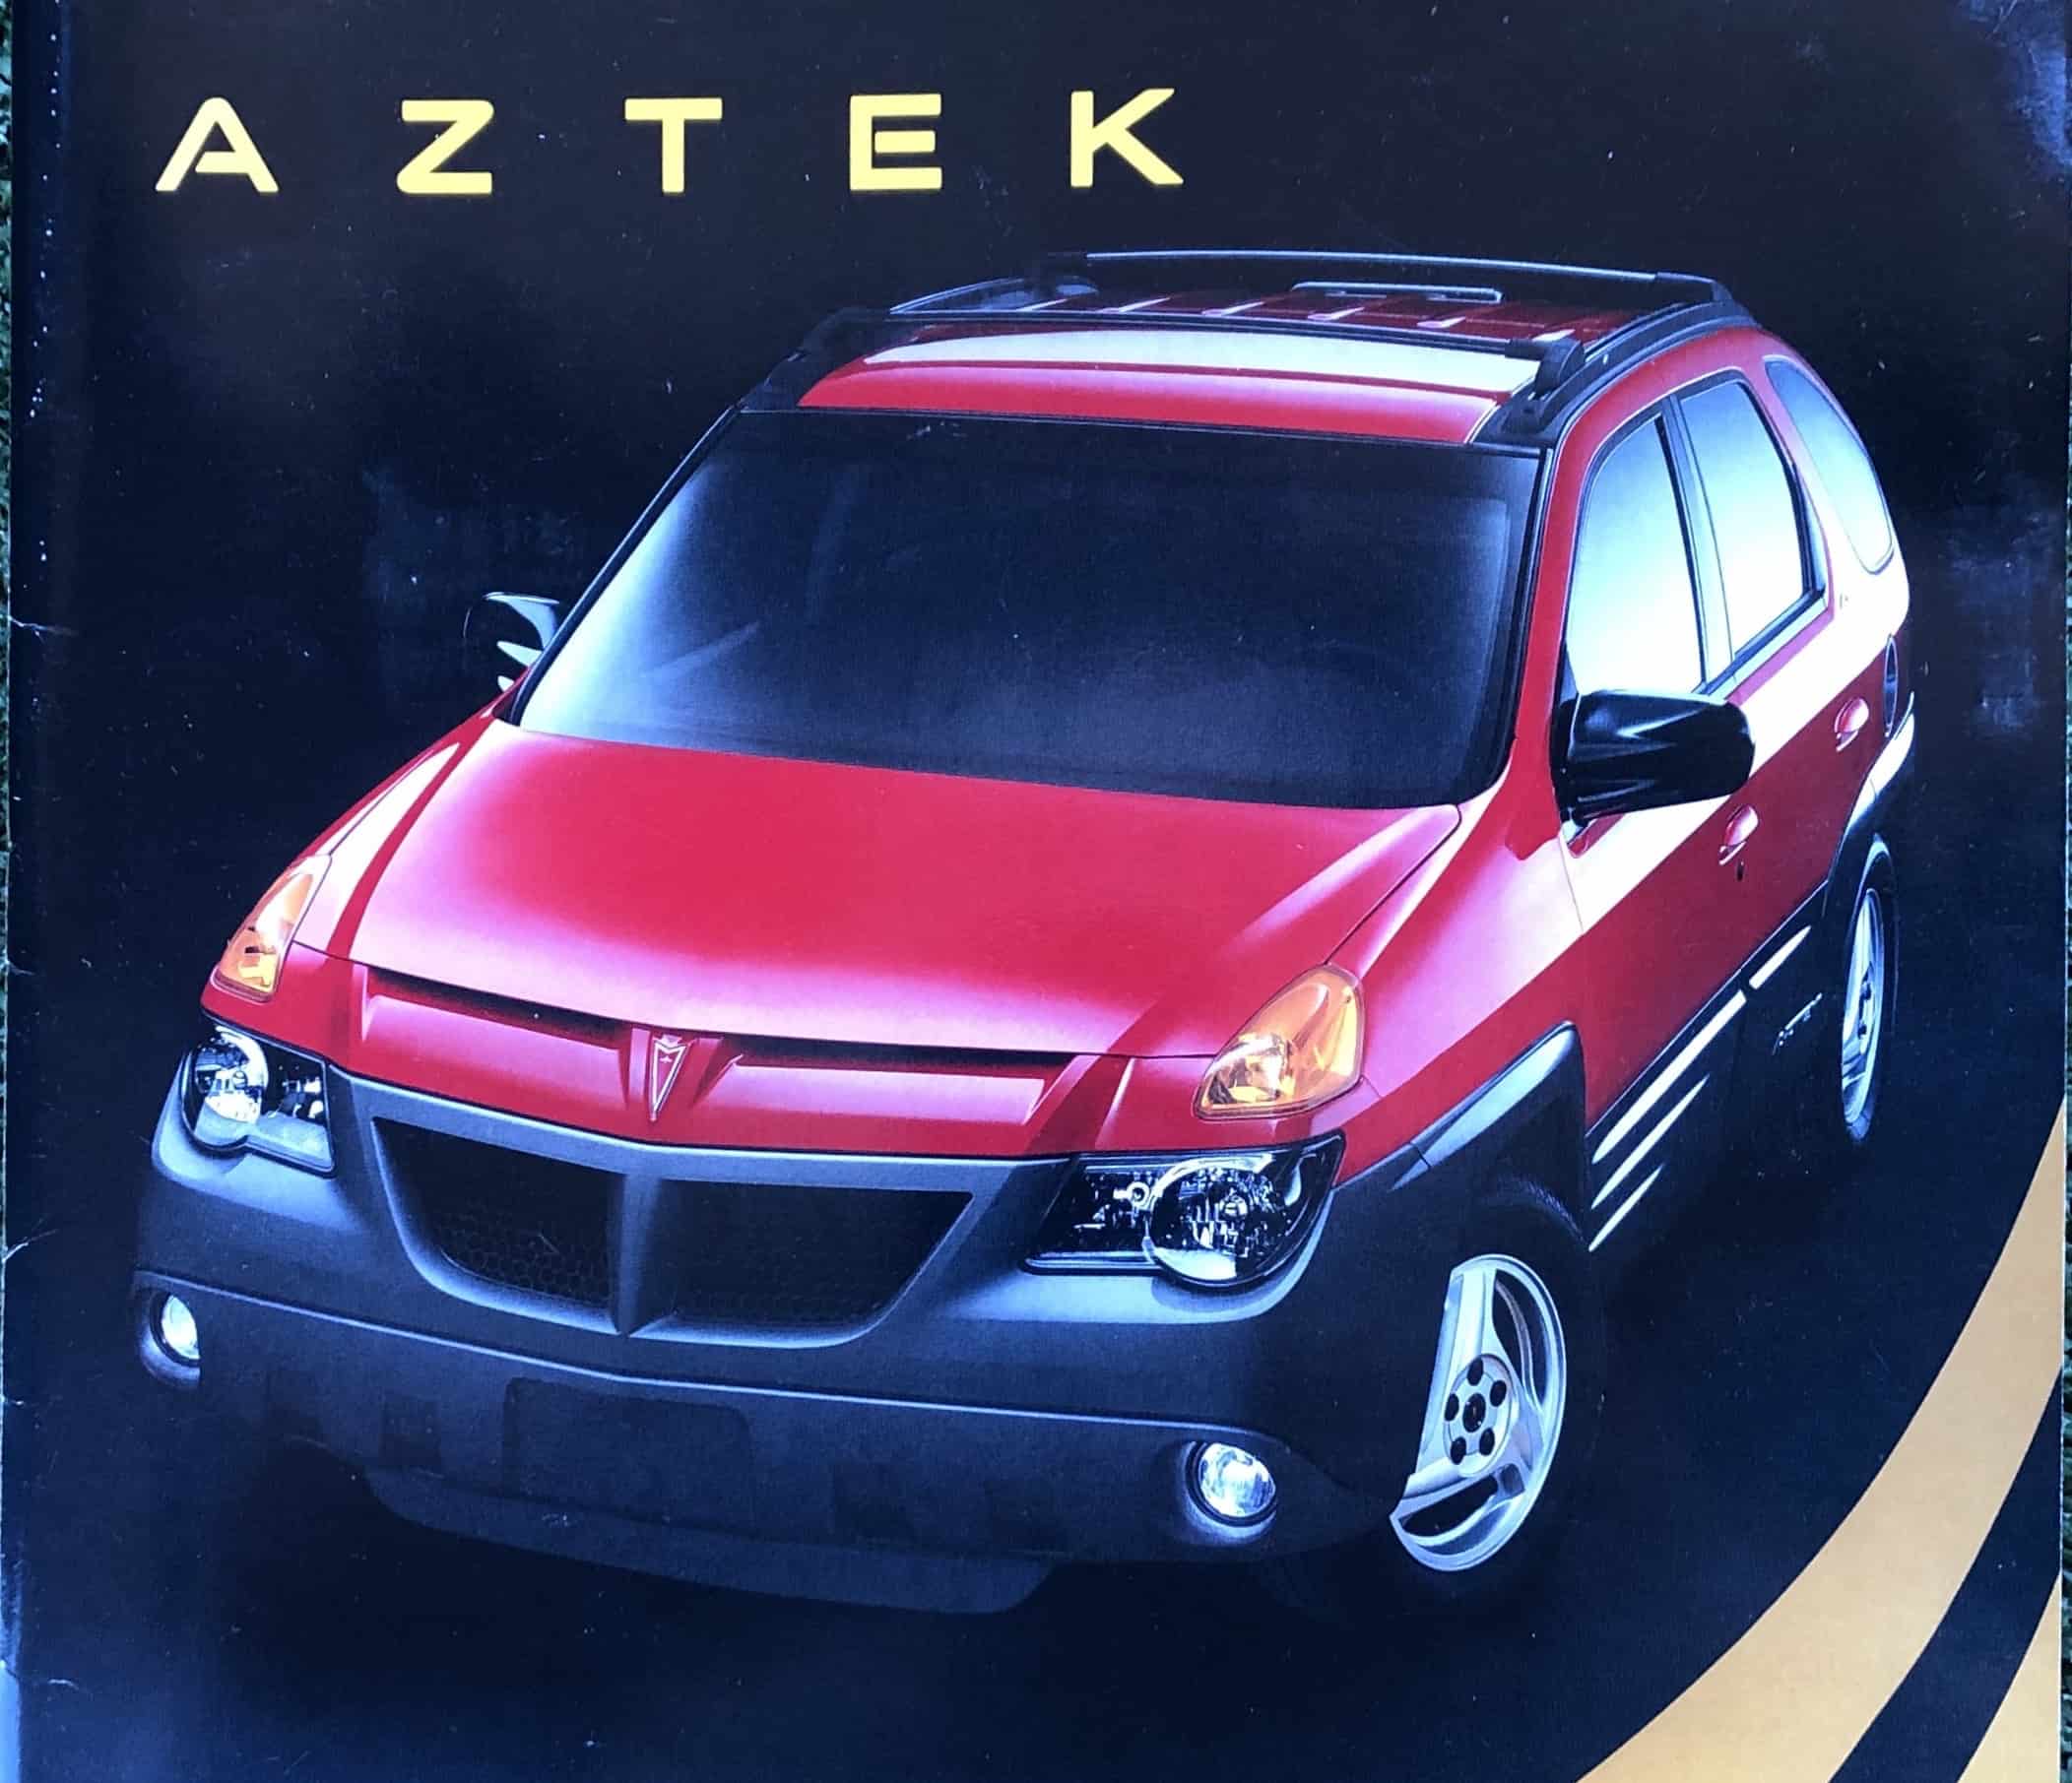 A lament for the Pontiac Aztek with facia only a mother could love